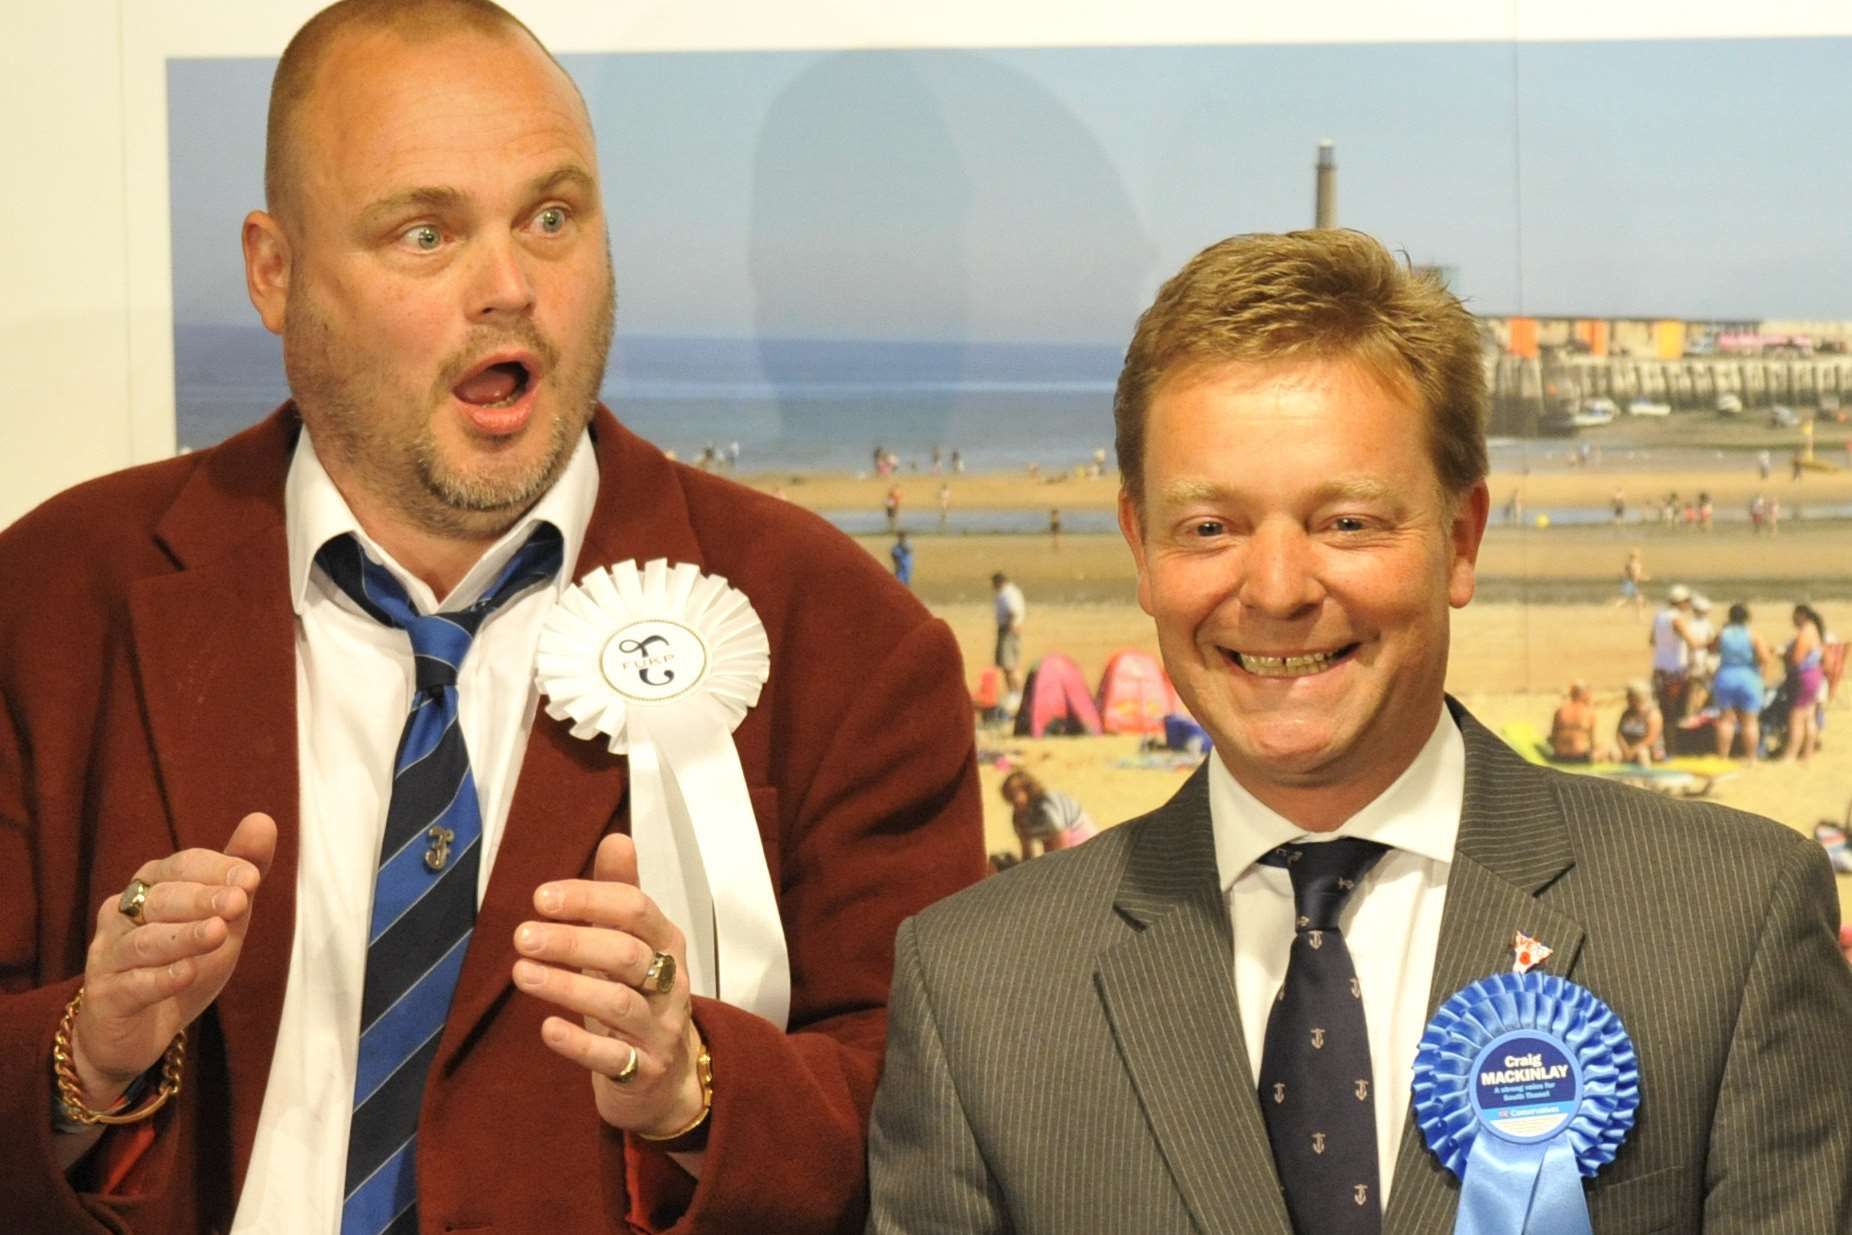 Craig Mackinlay wins South Thanet at the general election watched by pub landlord Al Murray